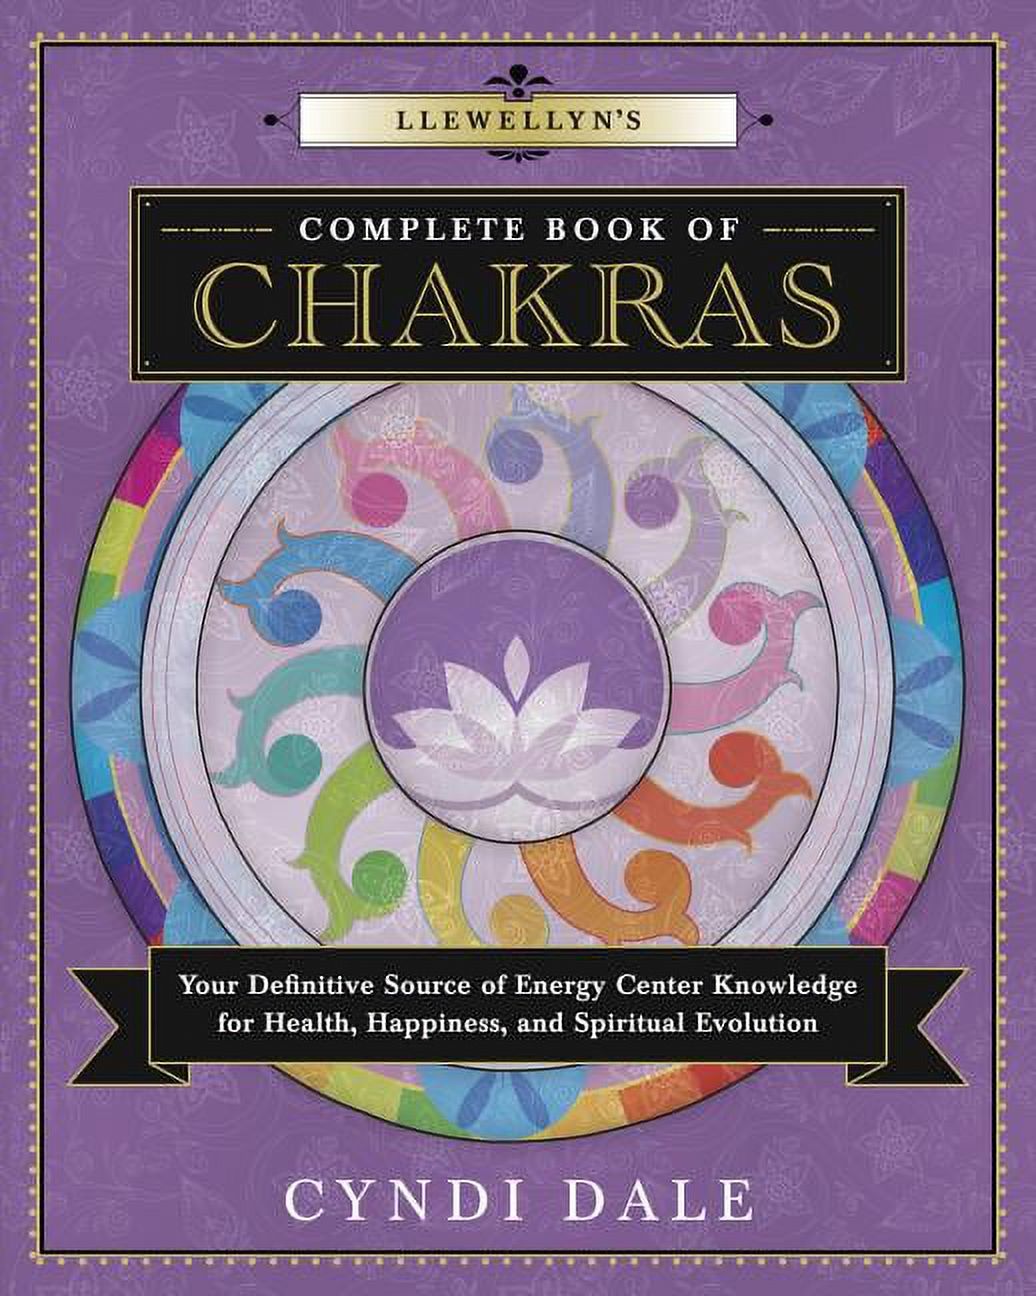 Llewellyn's Complete Book: Llewellyn's Complete Book of Chakras: Your Definitive Source of Energy Center Knowledge for Health, Happiness, and Spiritual Evolution (Paperback) - image 1 of 2